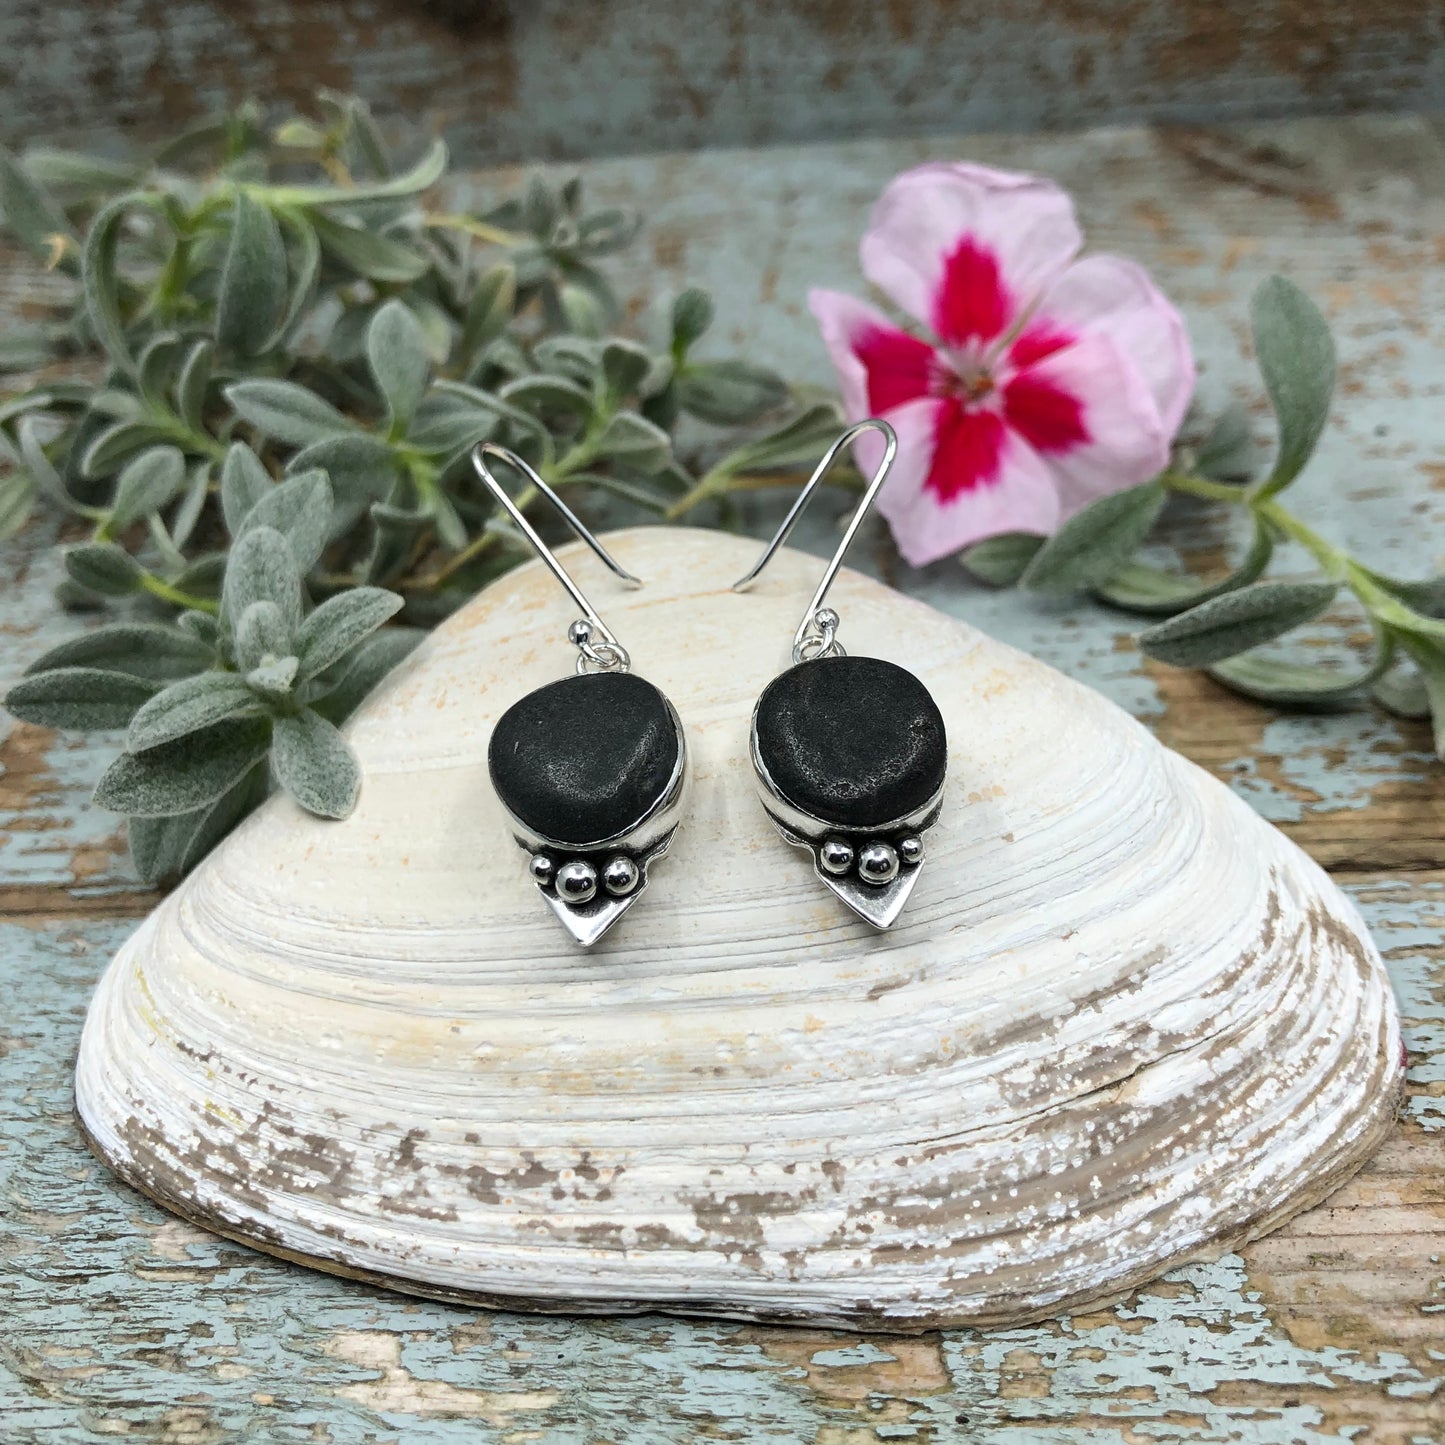 Beach Stone set in Sterling Silver with Spade Detail, Earrings